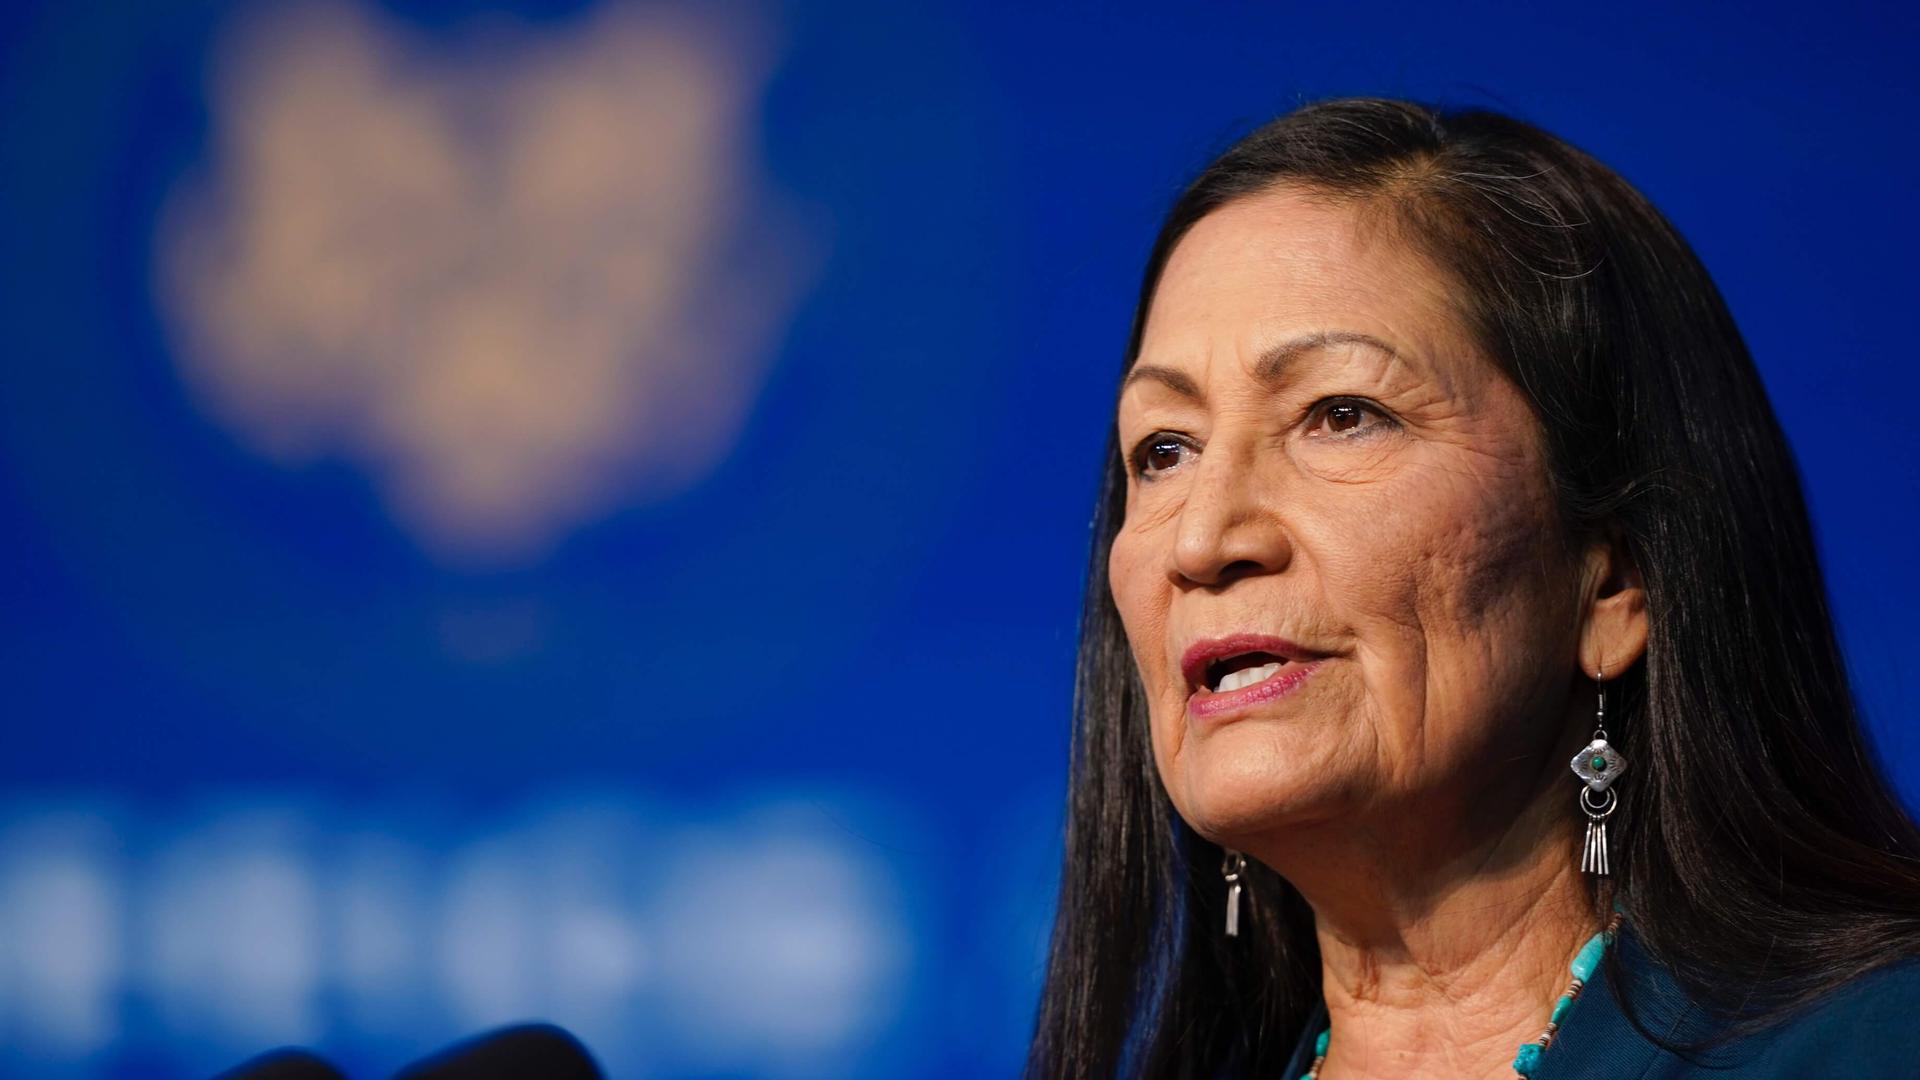 The Biden administration's nominee for secretary of interior, Democratic Rep. Deb Haaland, from New Mexico, speaks at The Queen Theater in Wilmington, Delaware, Dec. 19, 2020.